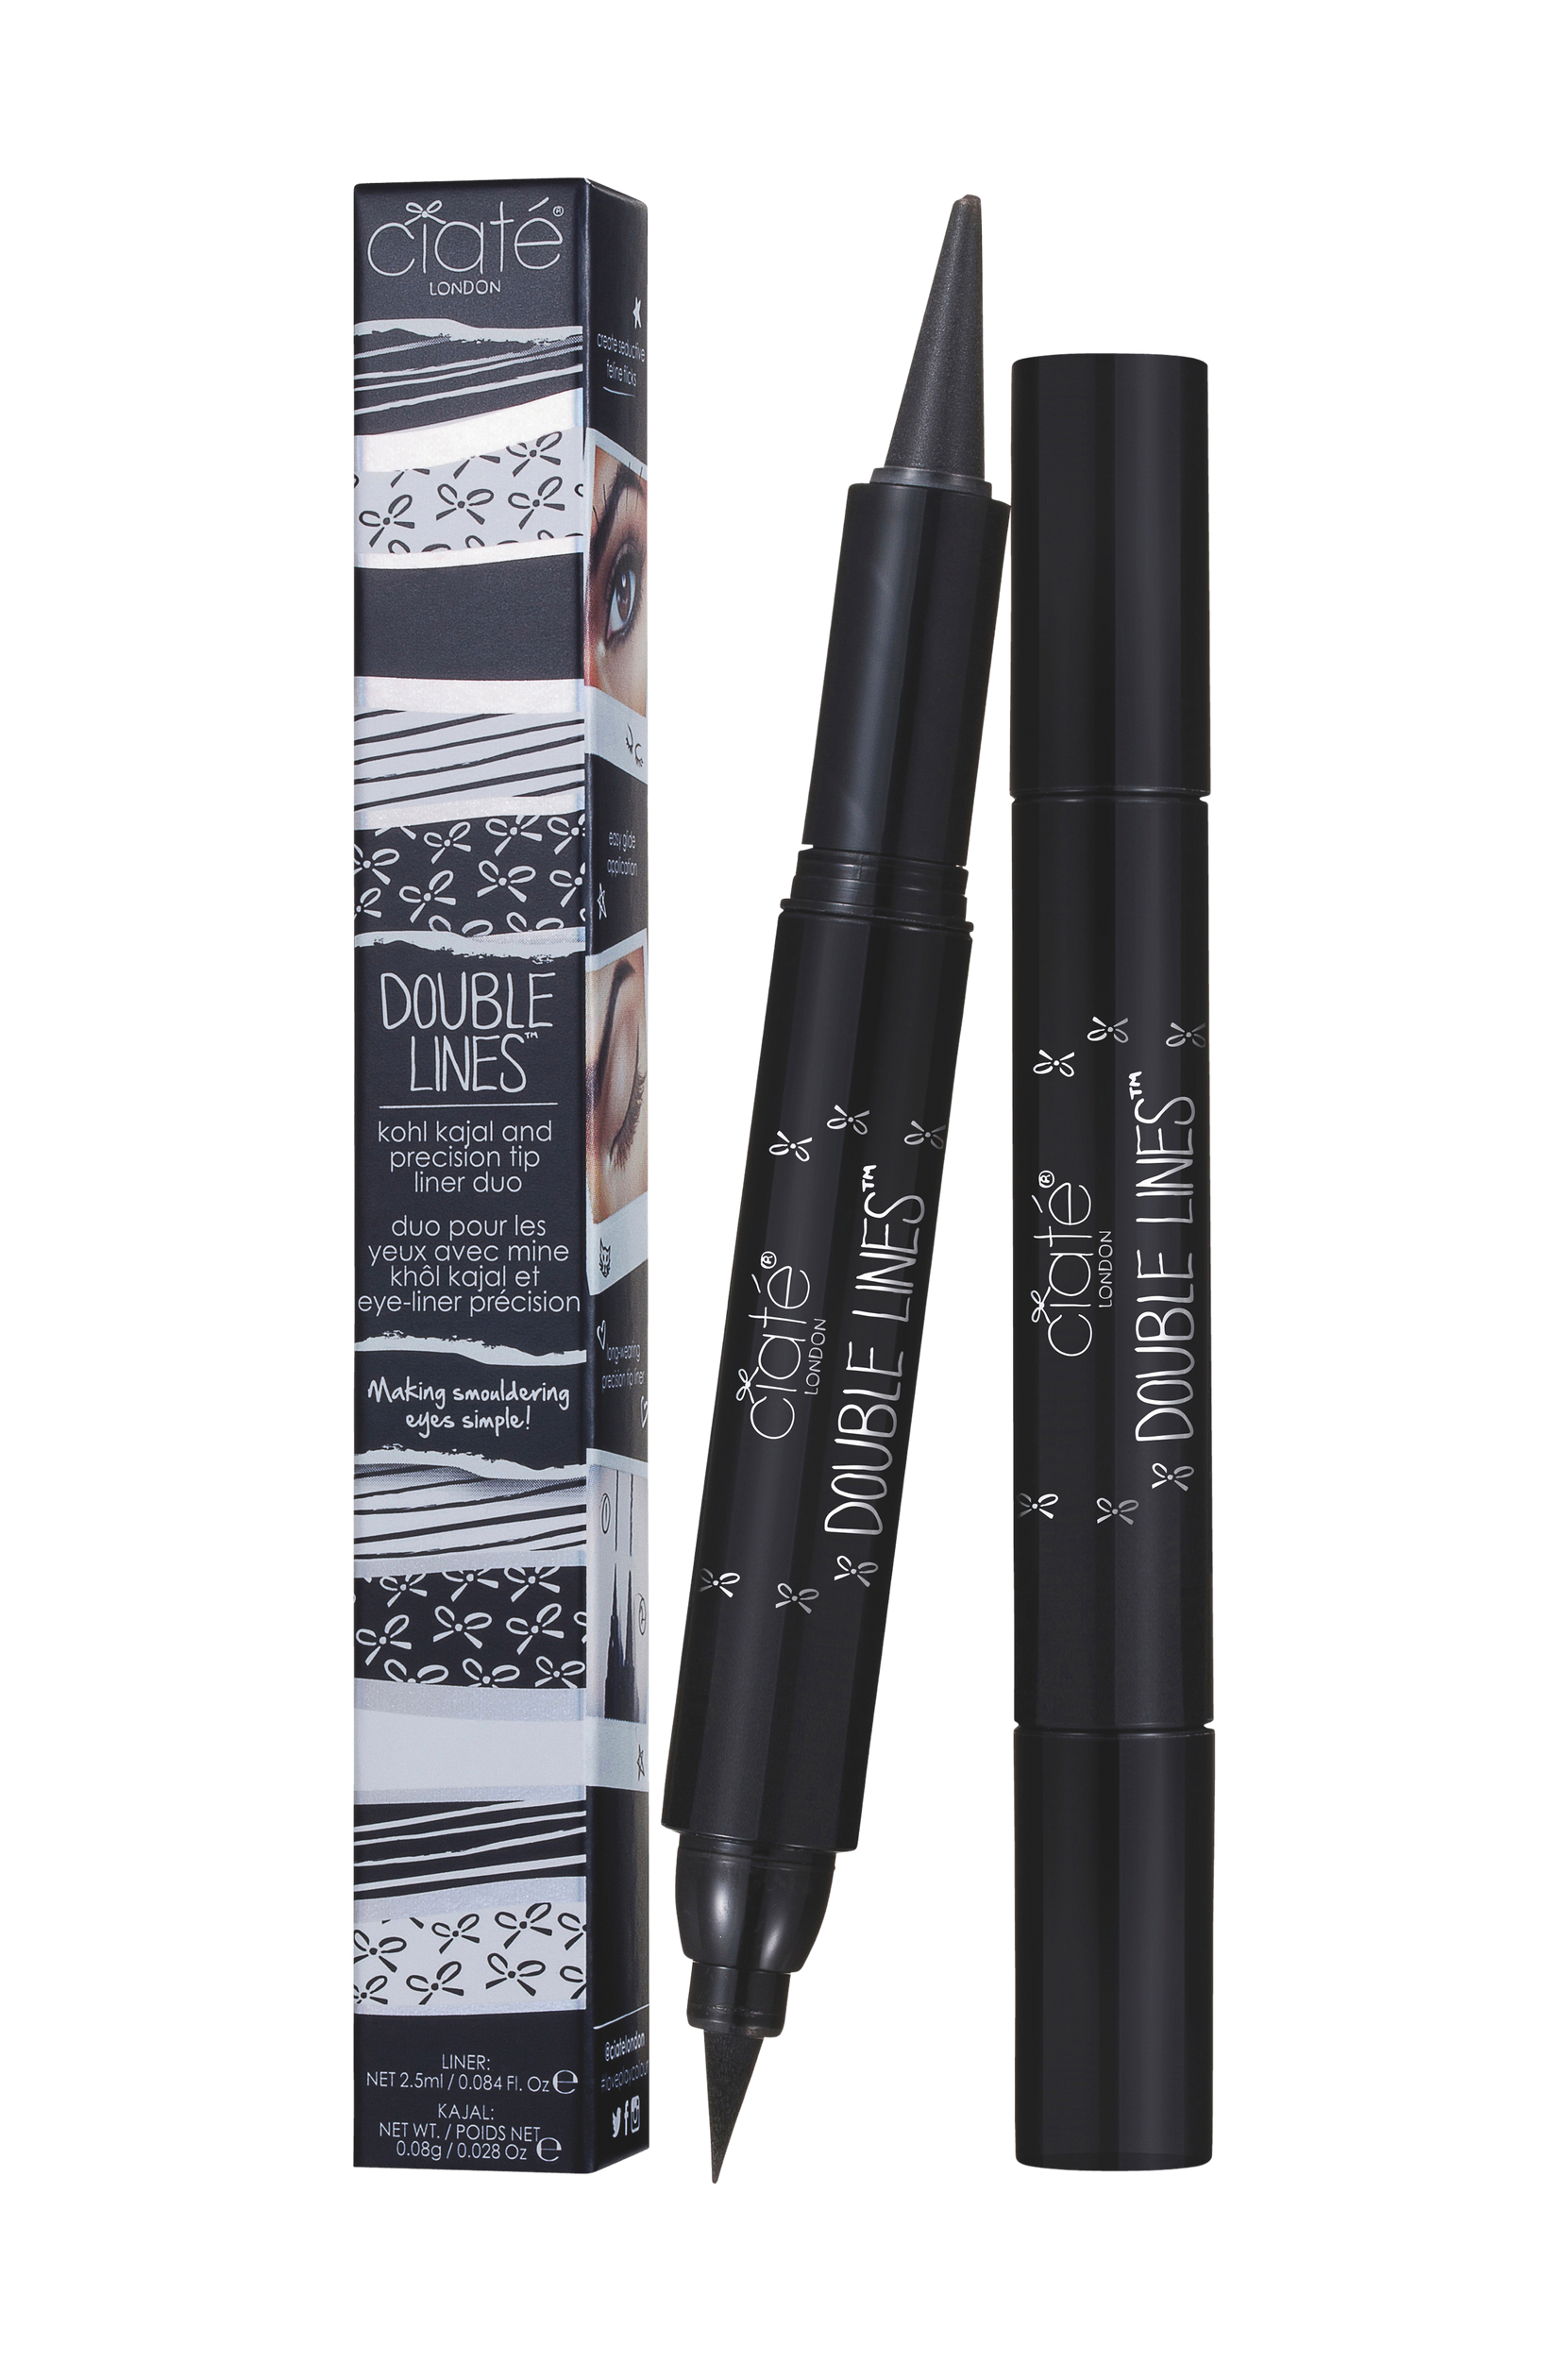 Double Lines Dual-Sided Eyeliner, Ciaté